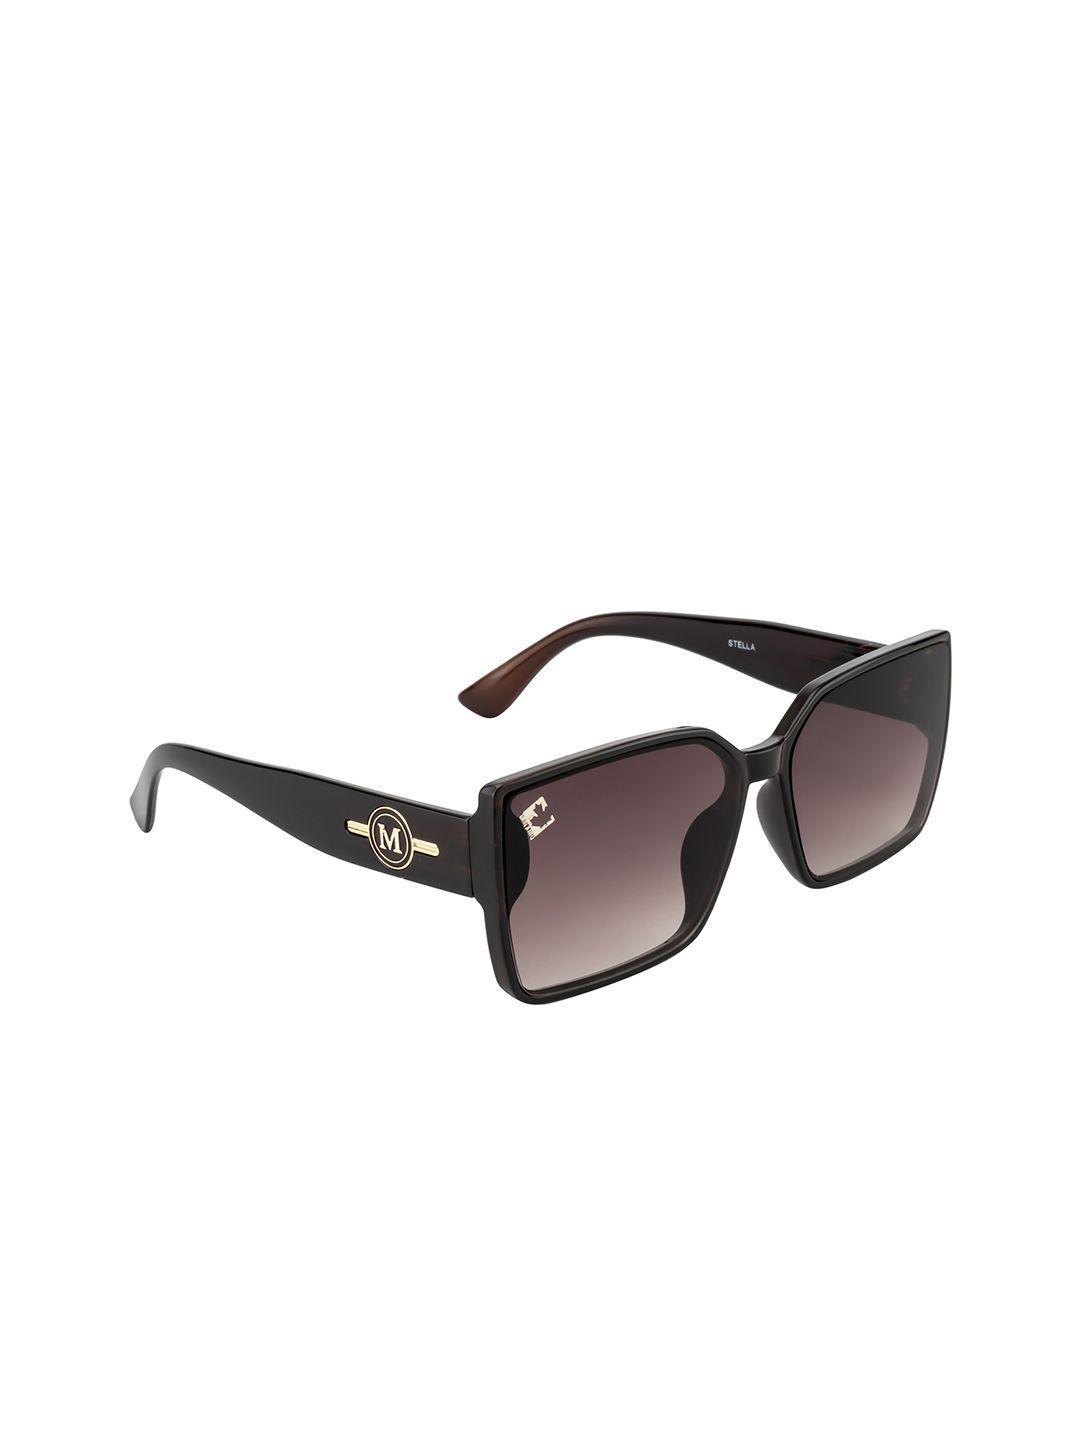 clark n palmer women square sunglasses with uv protected lens